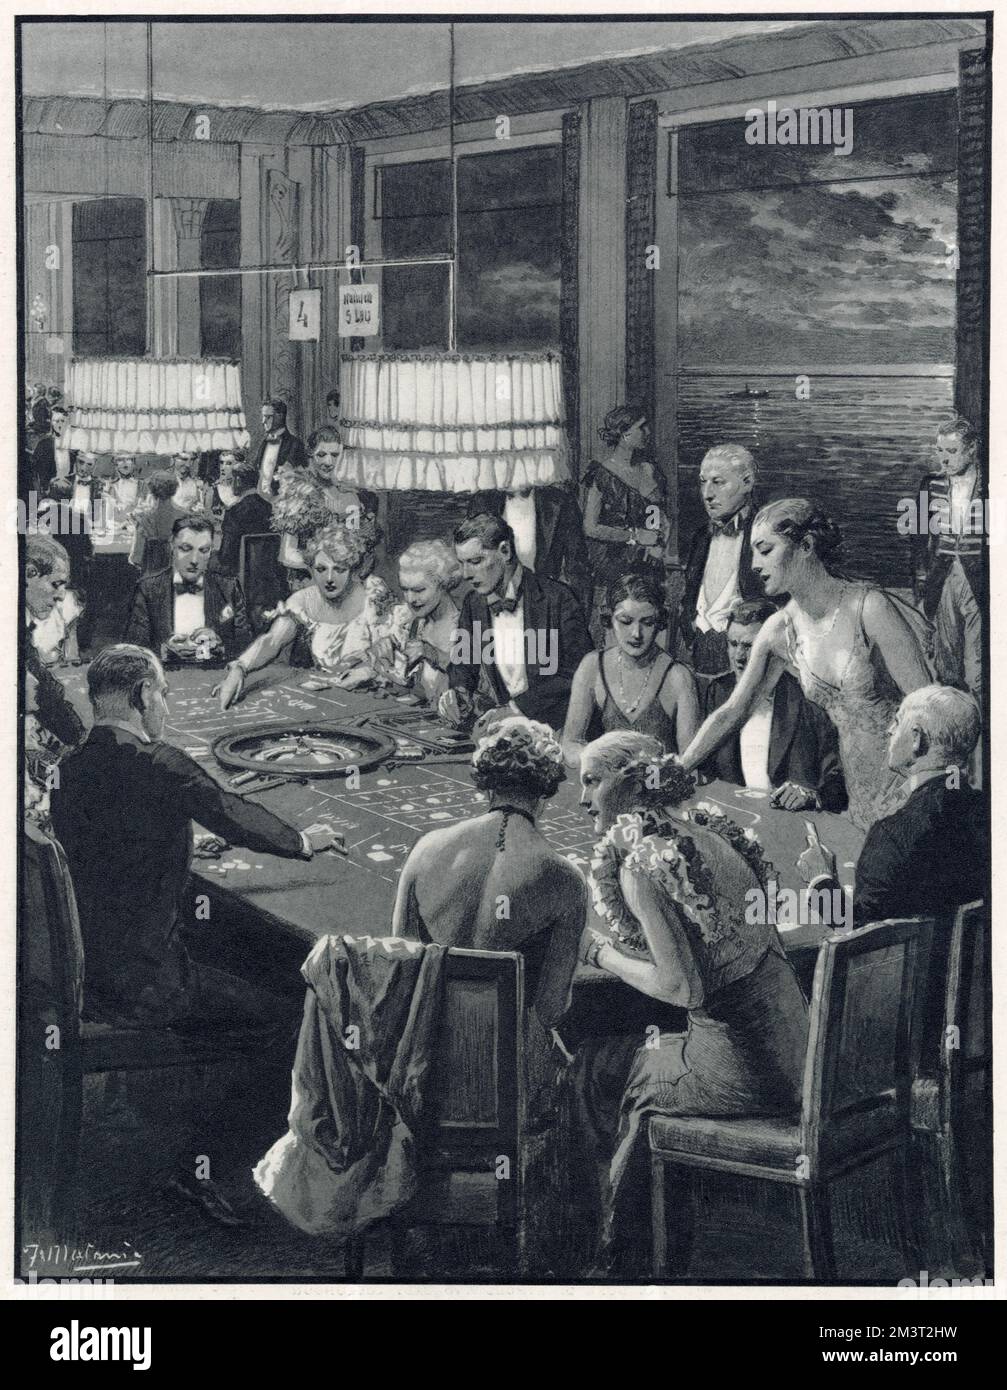 Gambling taking place on a terrace on a summers evening in Monte Carlo. Stock Photo